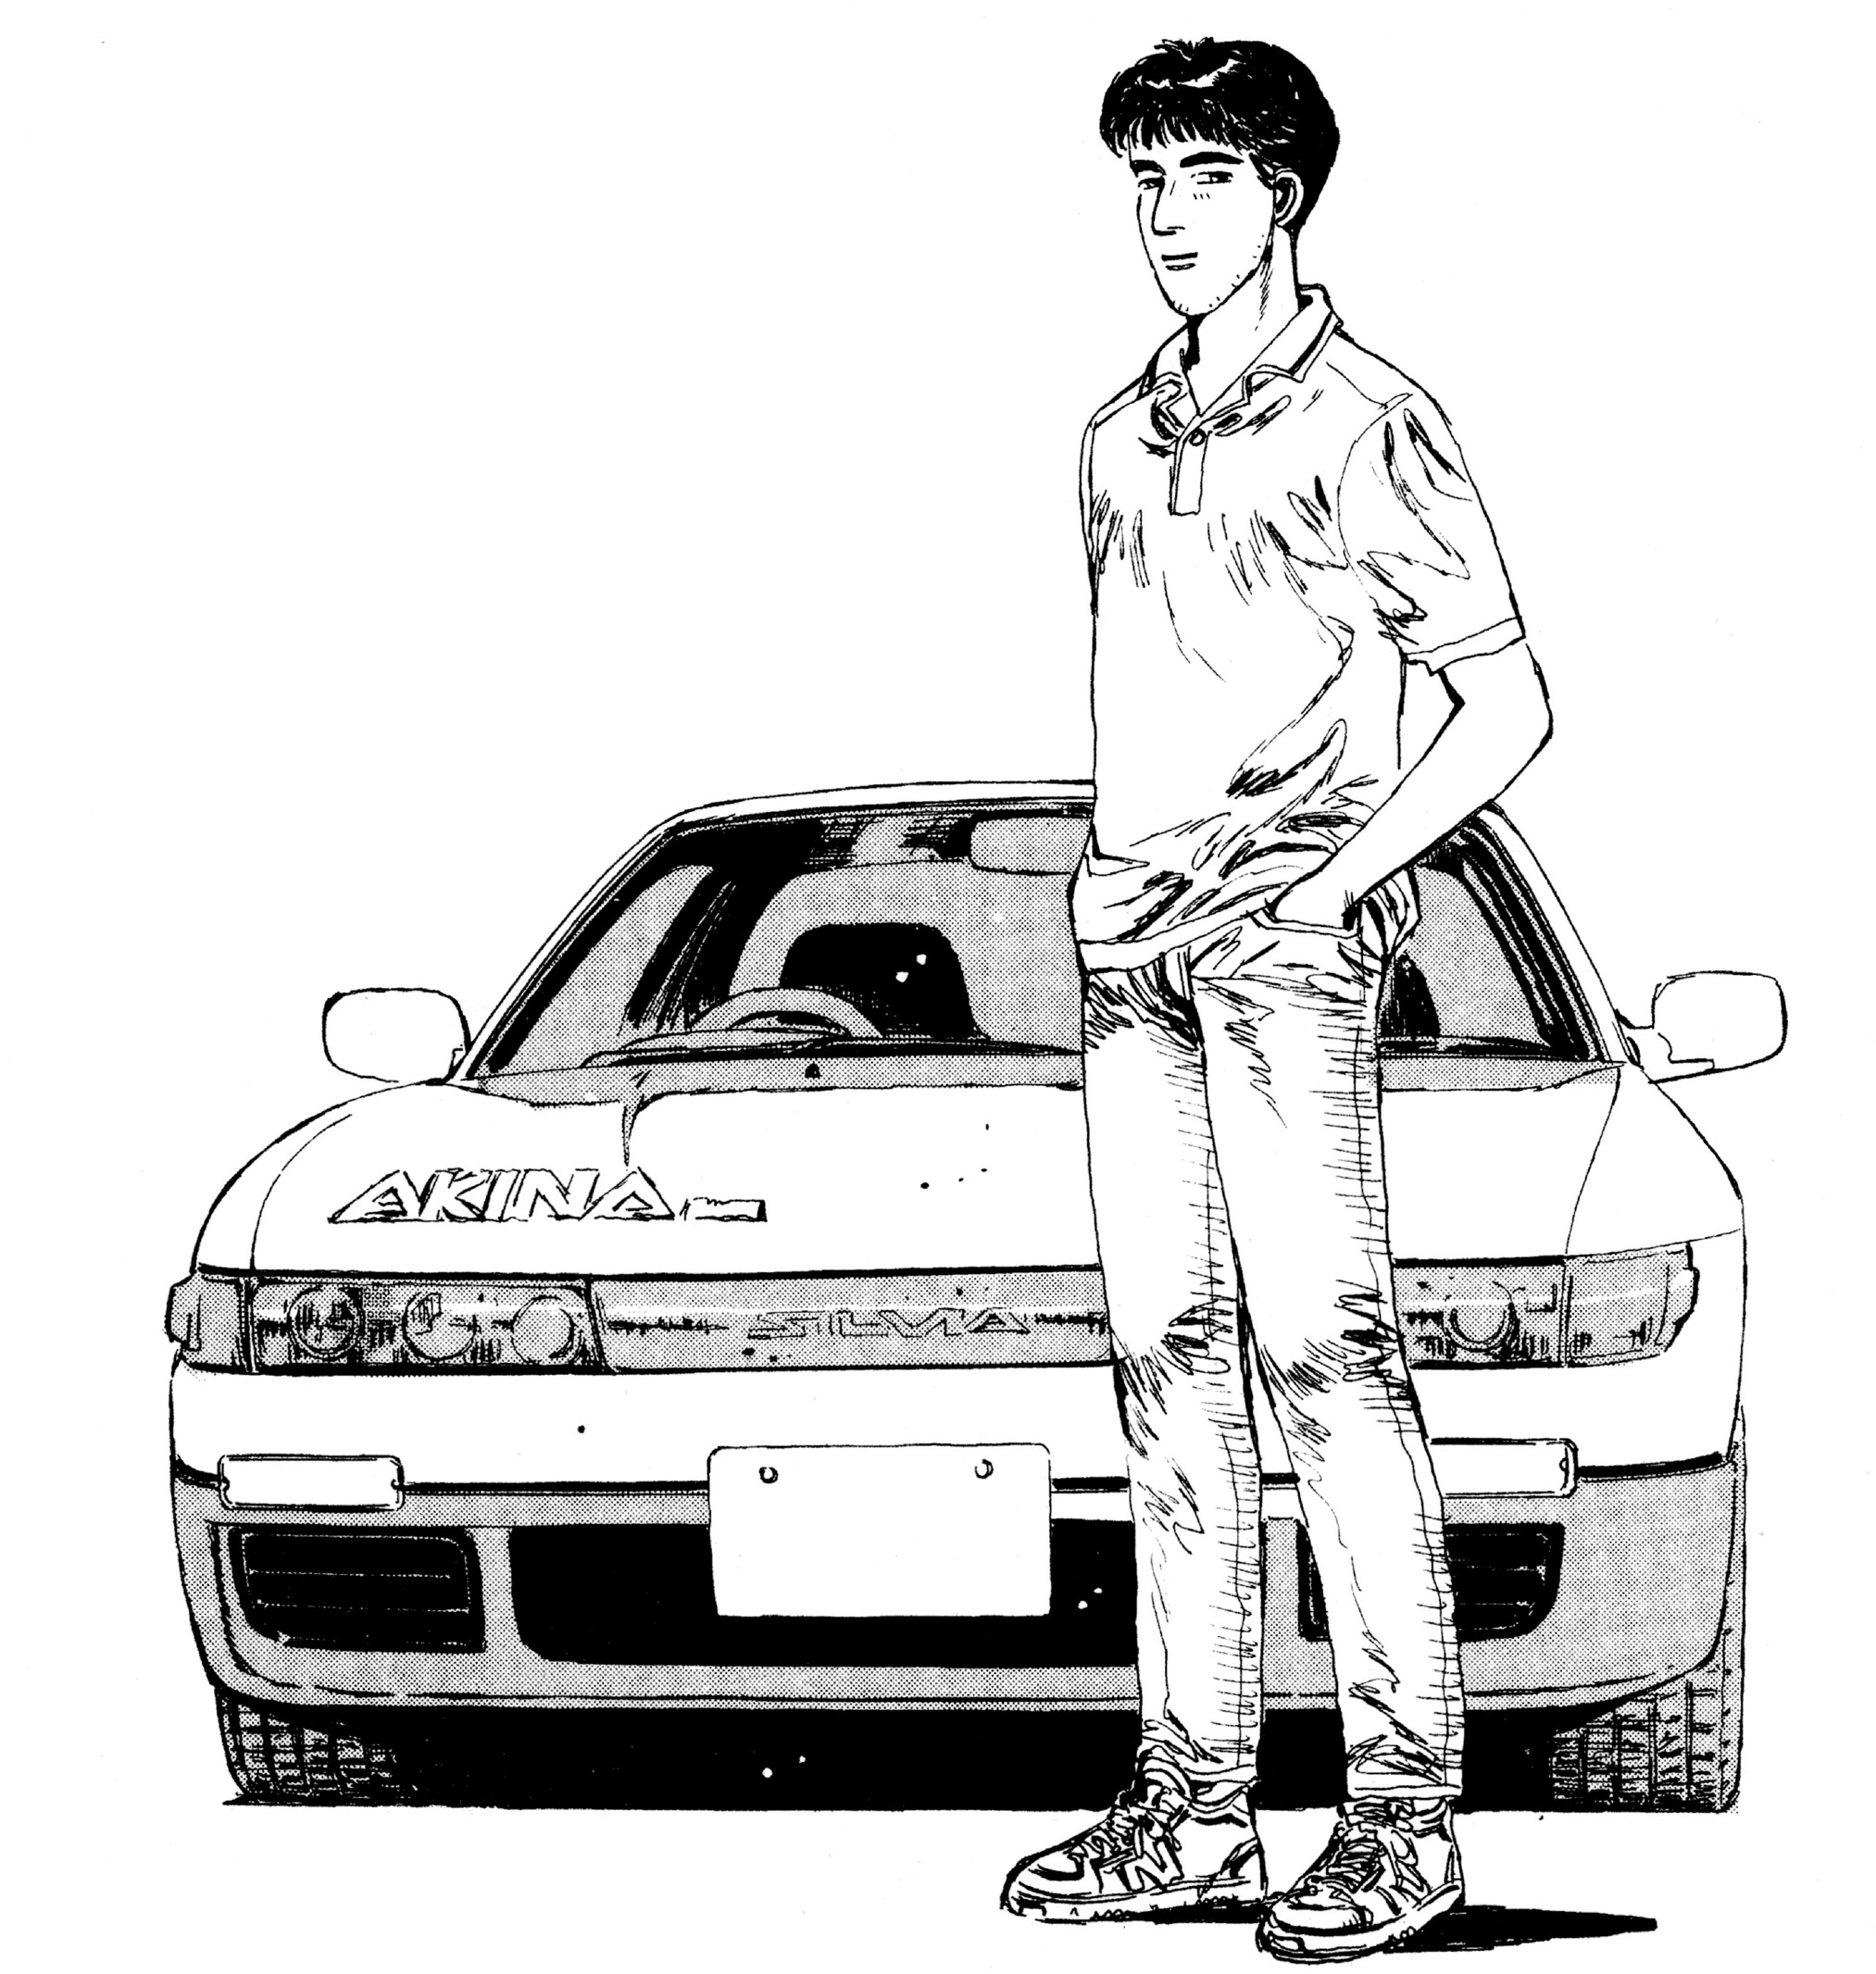 Initial D Fourth Stage Sound Files, Initial D Wiki